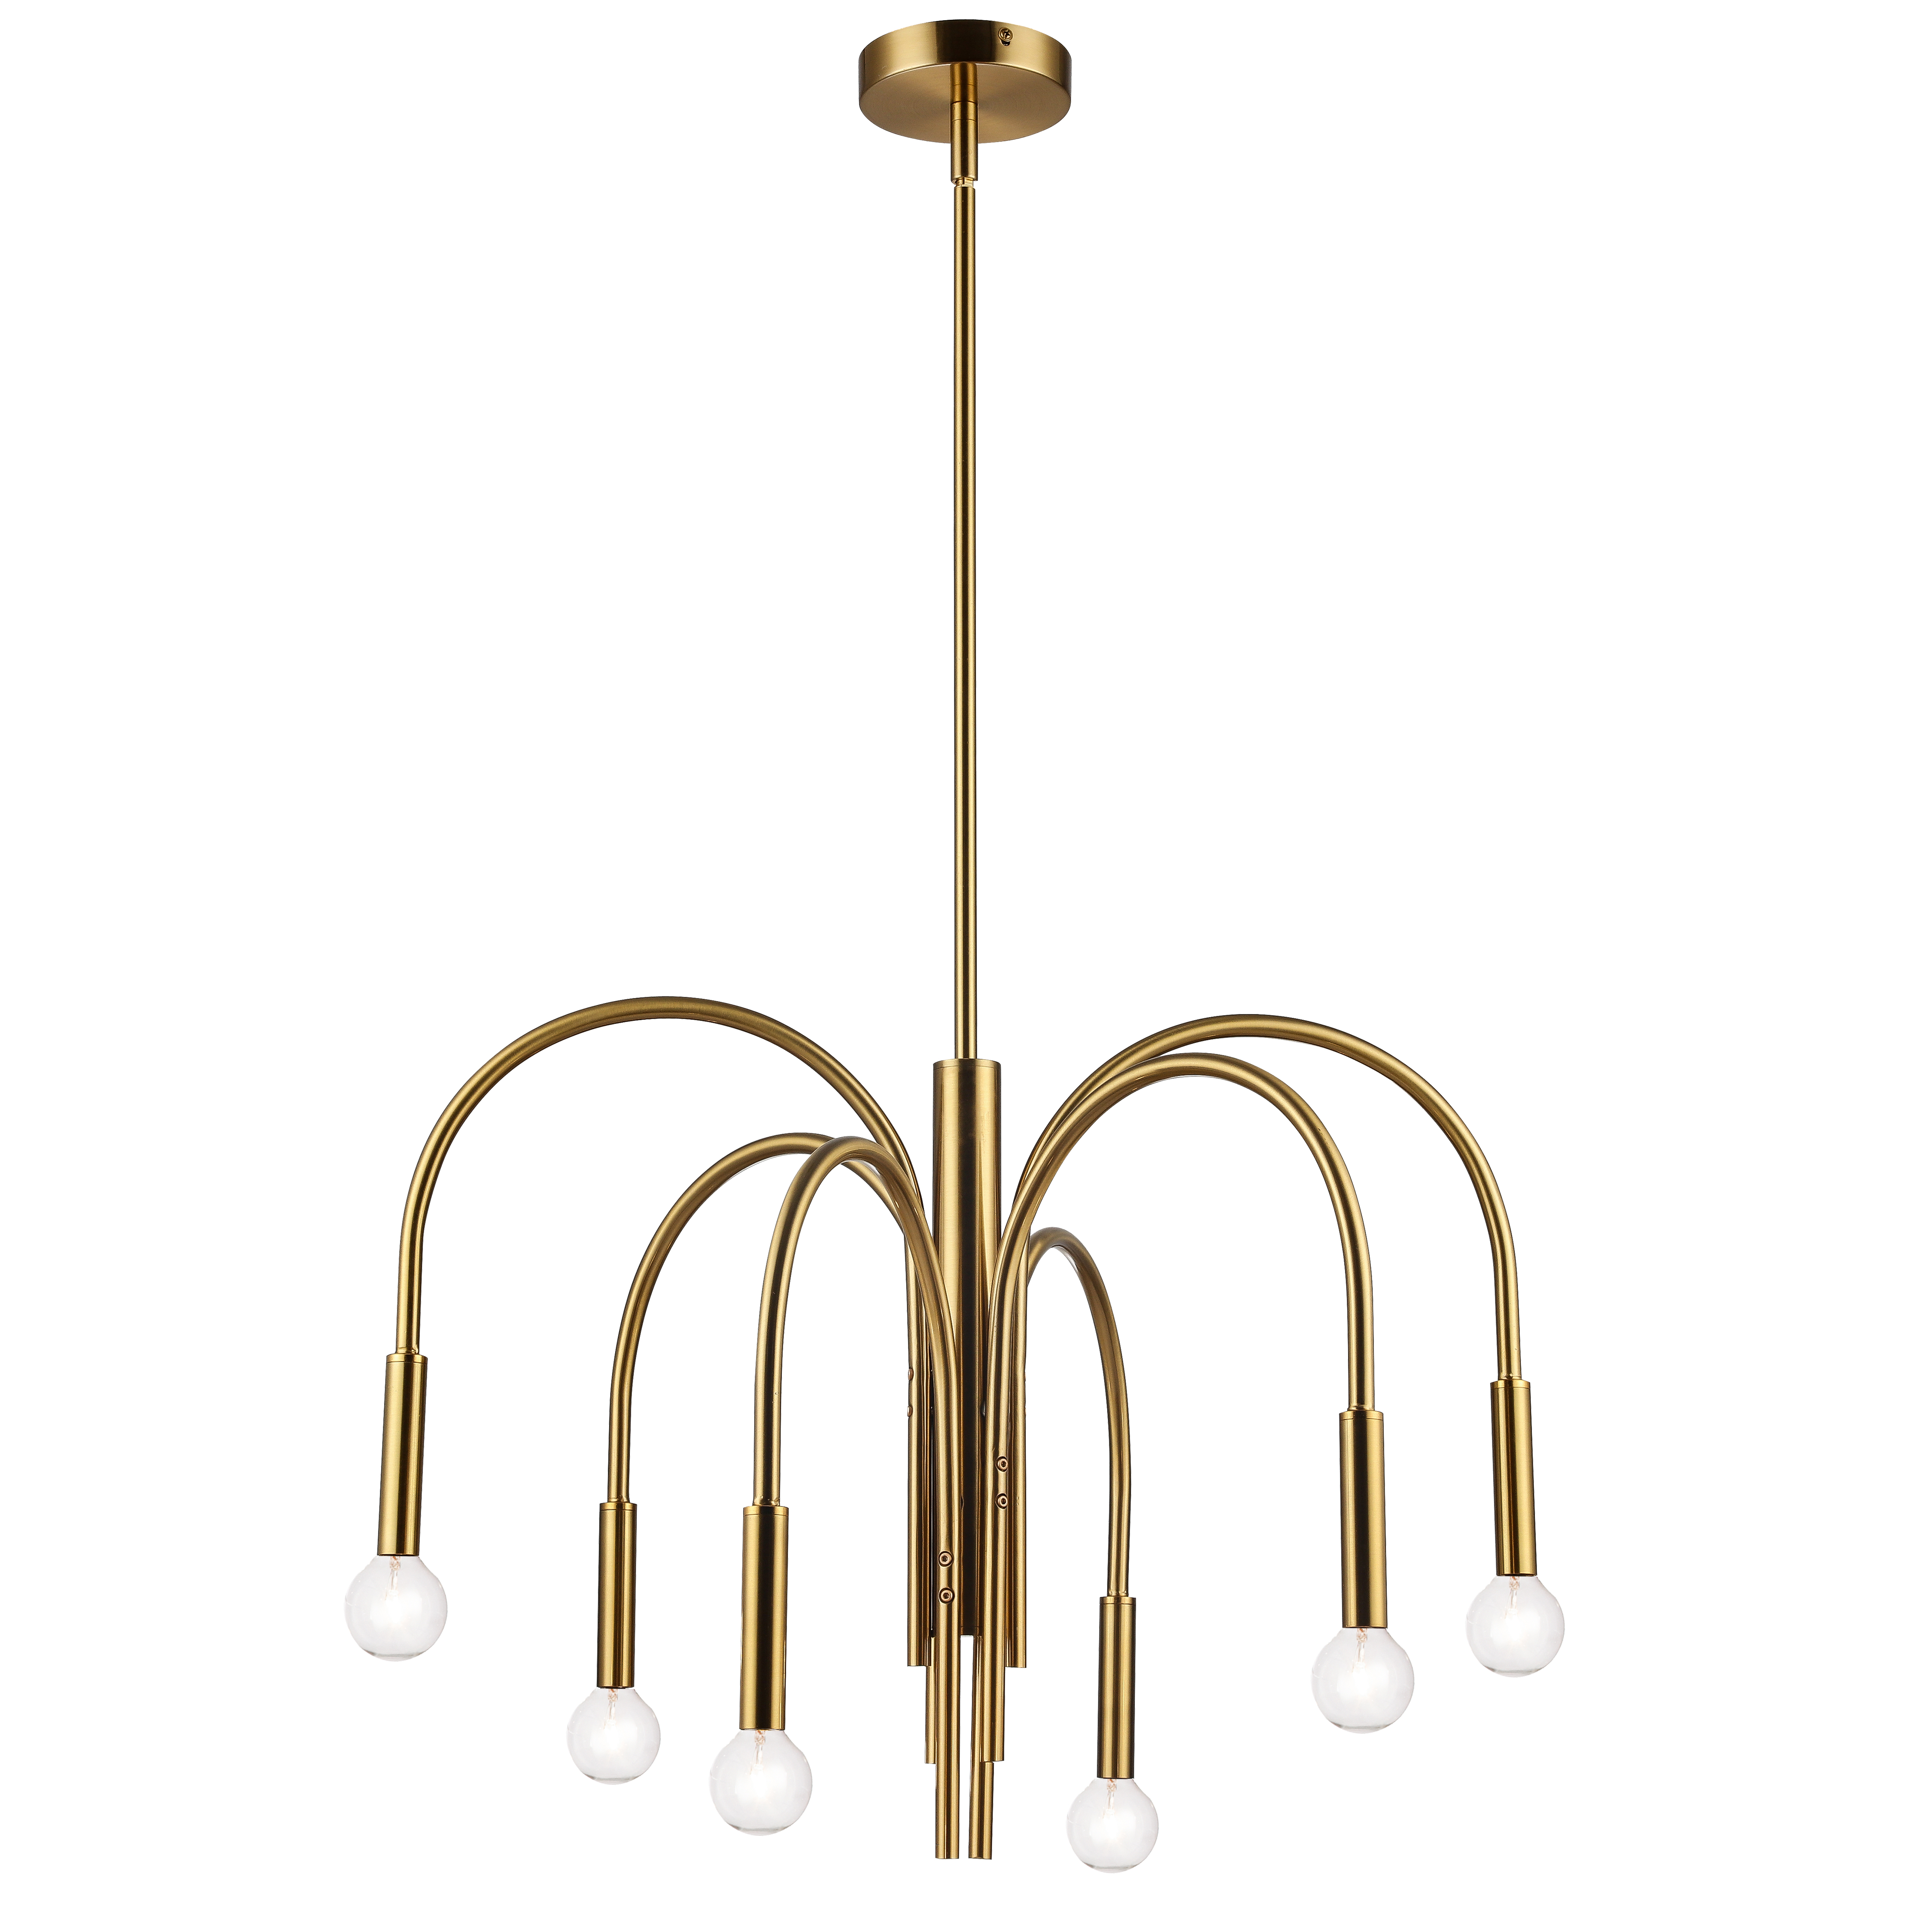 Modern, yet timeless, and sleek, but with a hint of vintage distinction, the Callway chandelier has a fluid sense of elegance that will grace any room.  The base drop is crafted in metal, with a choice of finish that provides a contrast to the light fixtures. The bulbs are round, completing the curved design. Callway chandelier lighting will blend with both modern and more traditional furnishings, including mid-century and pop art design schemes.